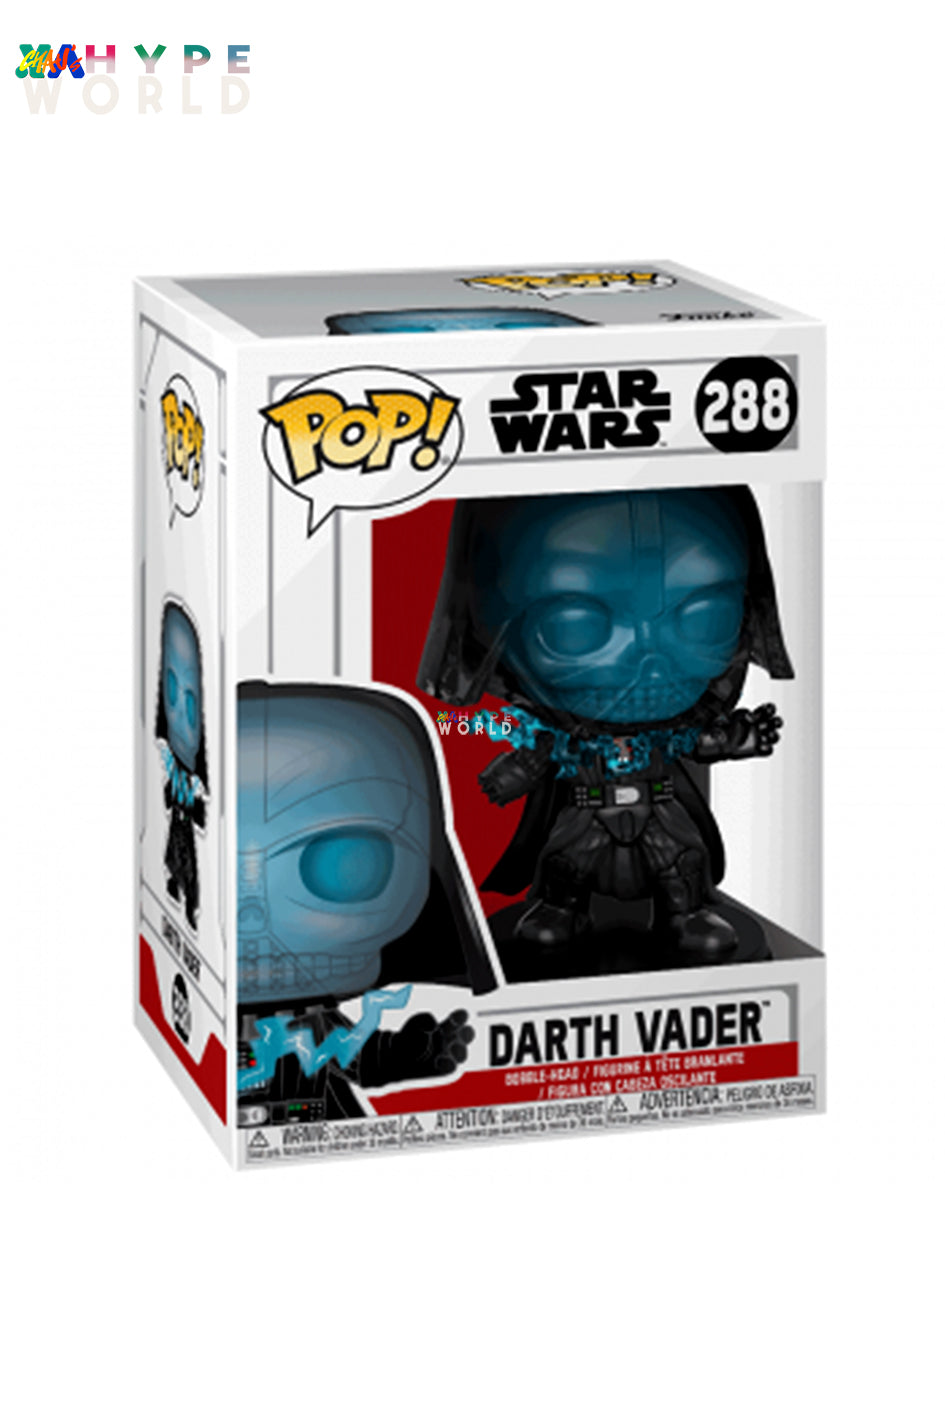 Star Wars - Darth Vader Electrocuted 288 [Foldable Protector]